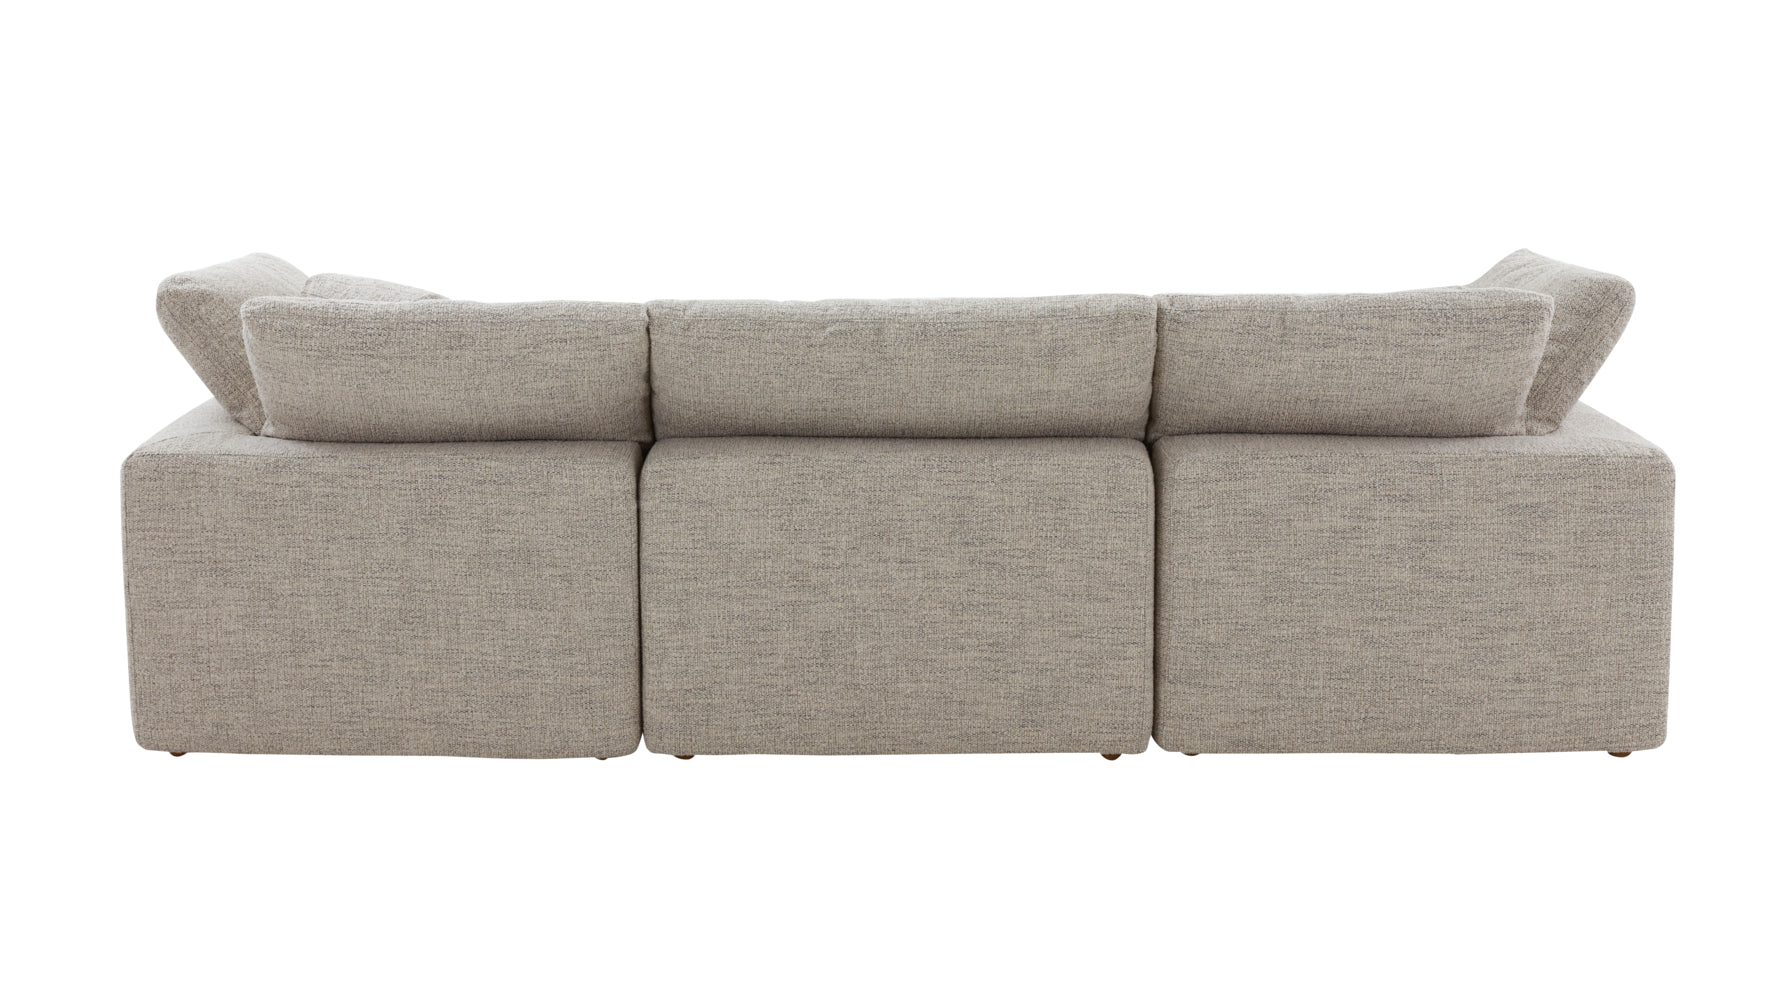 Movie Night™ 4-Piece Modular Sectional Closed, Standard, Oatmeal - Image 8